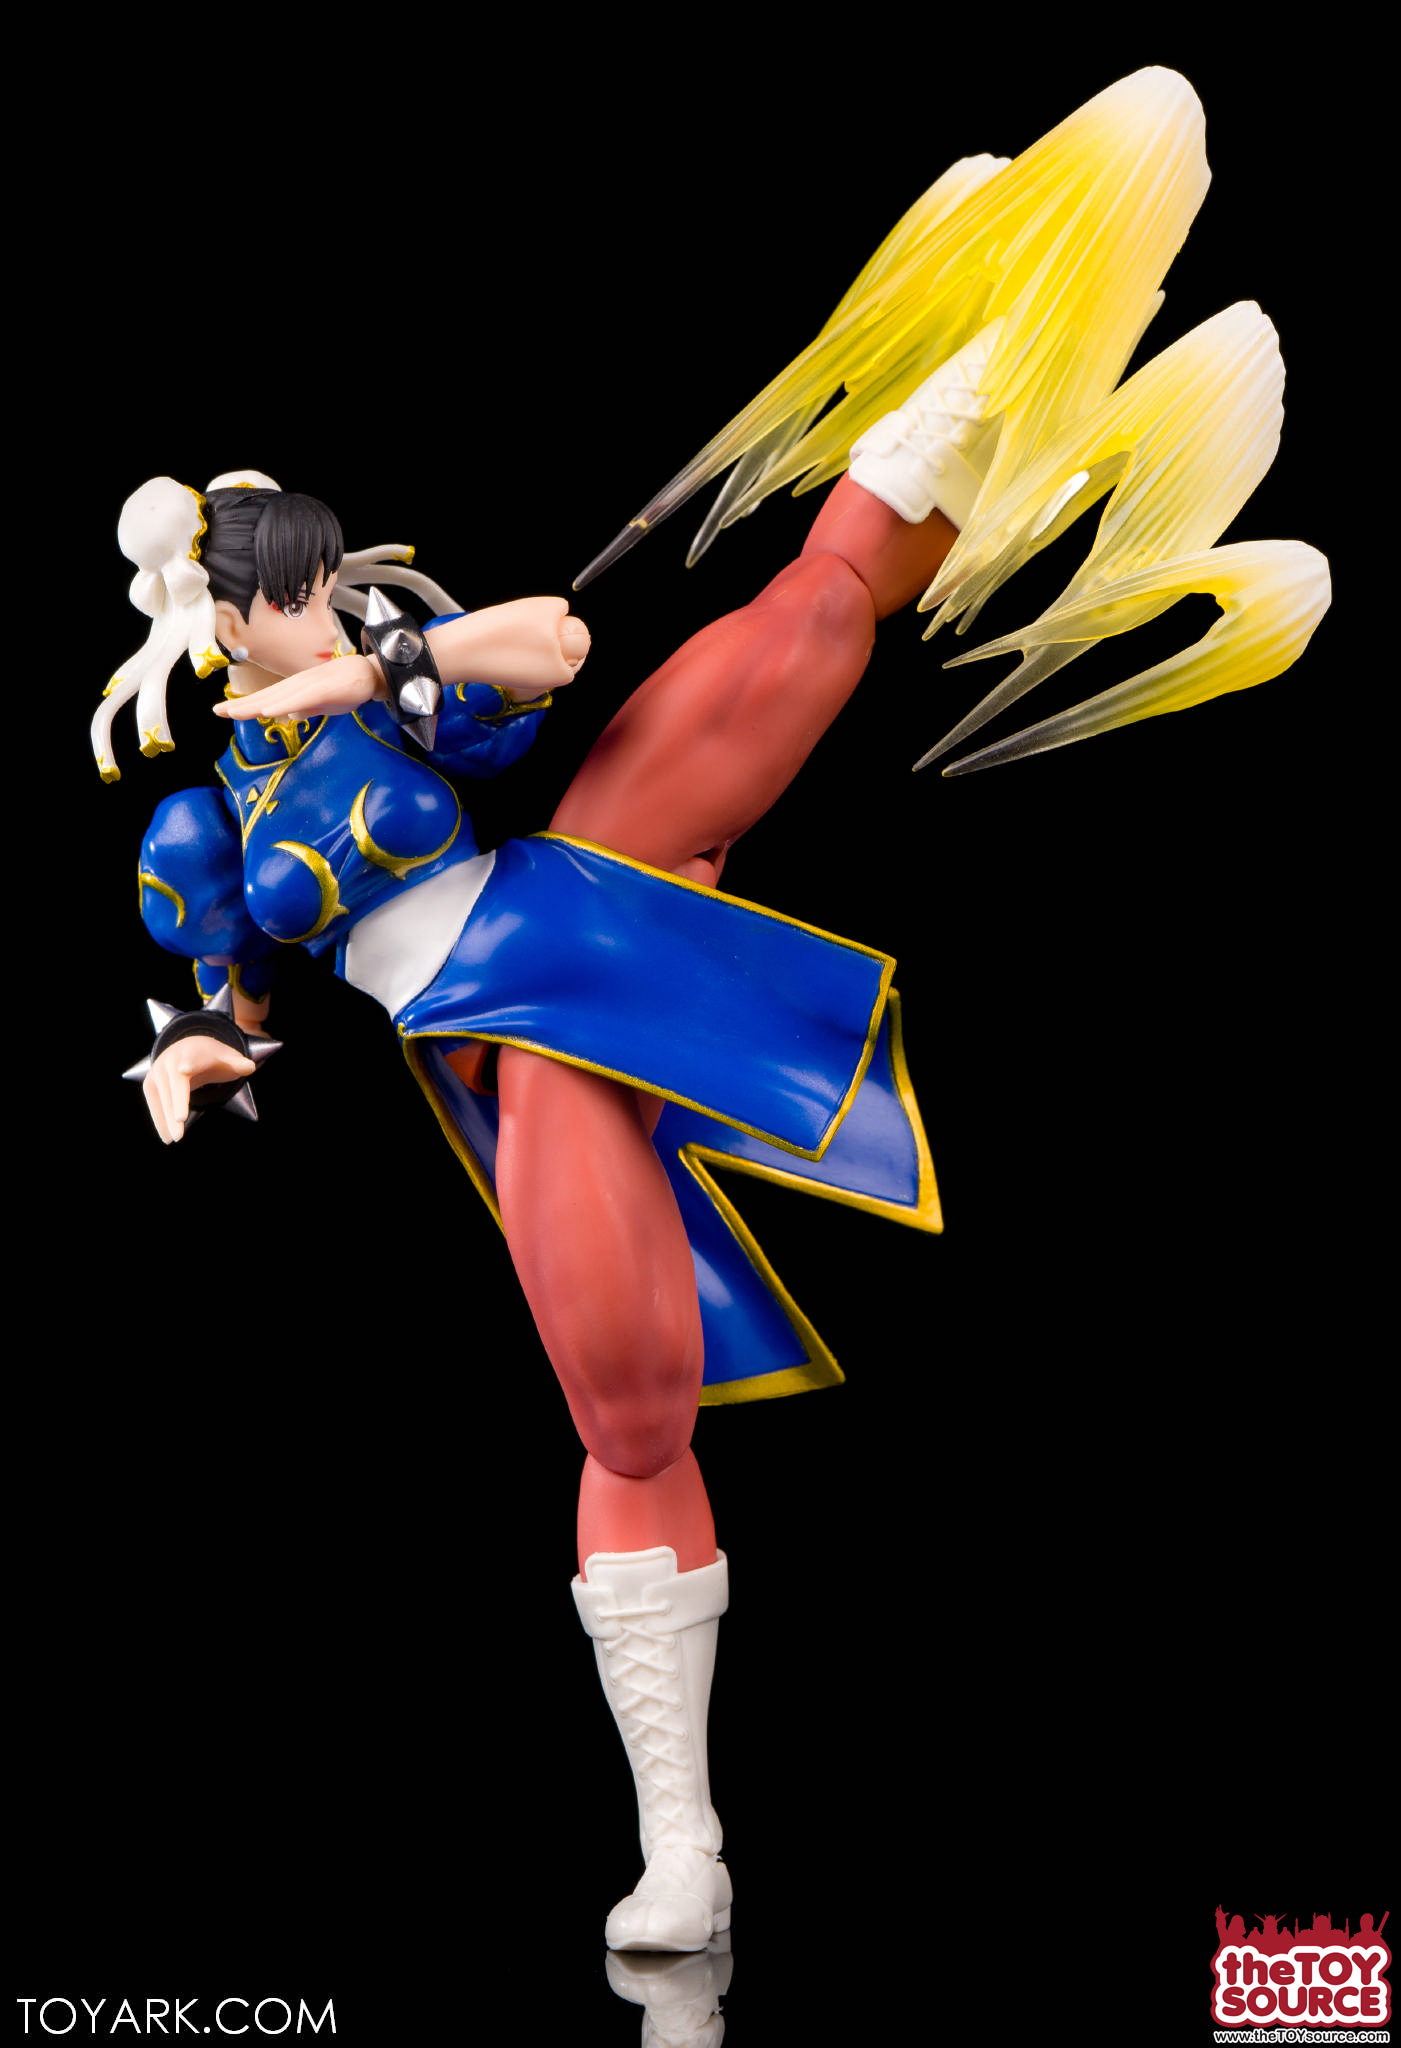 New Street Fighter Figures Are Cool